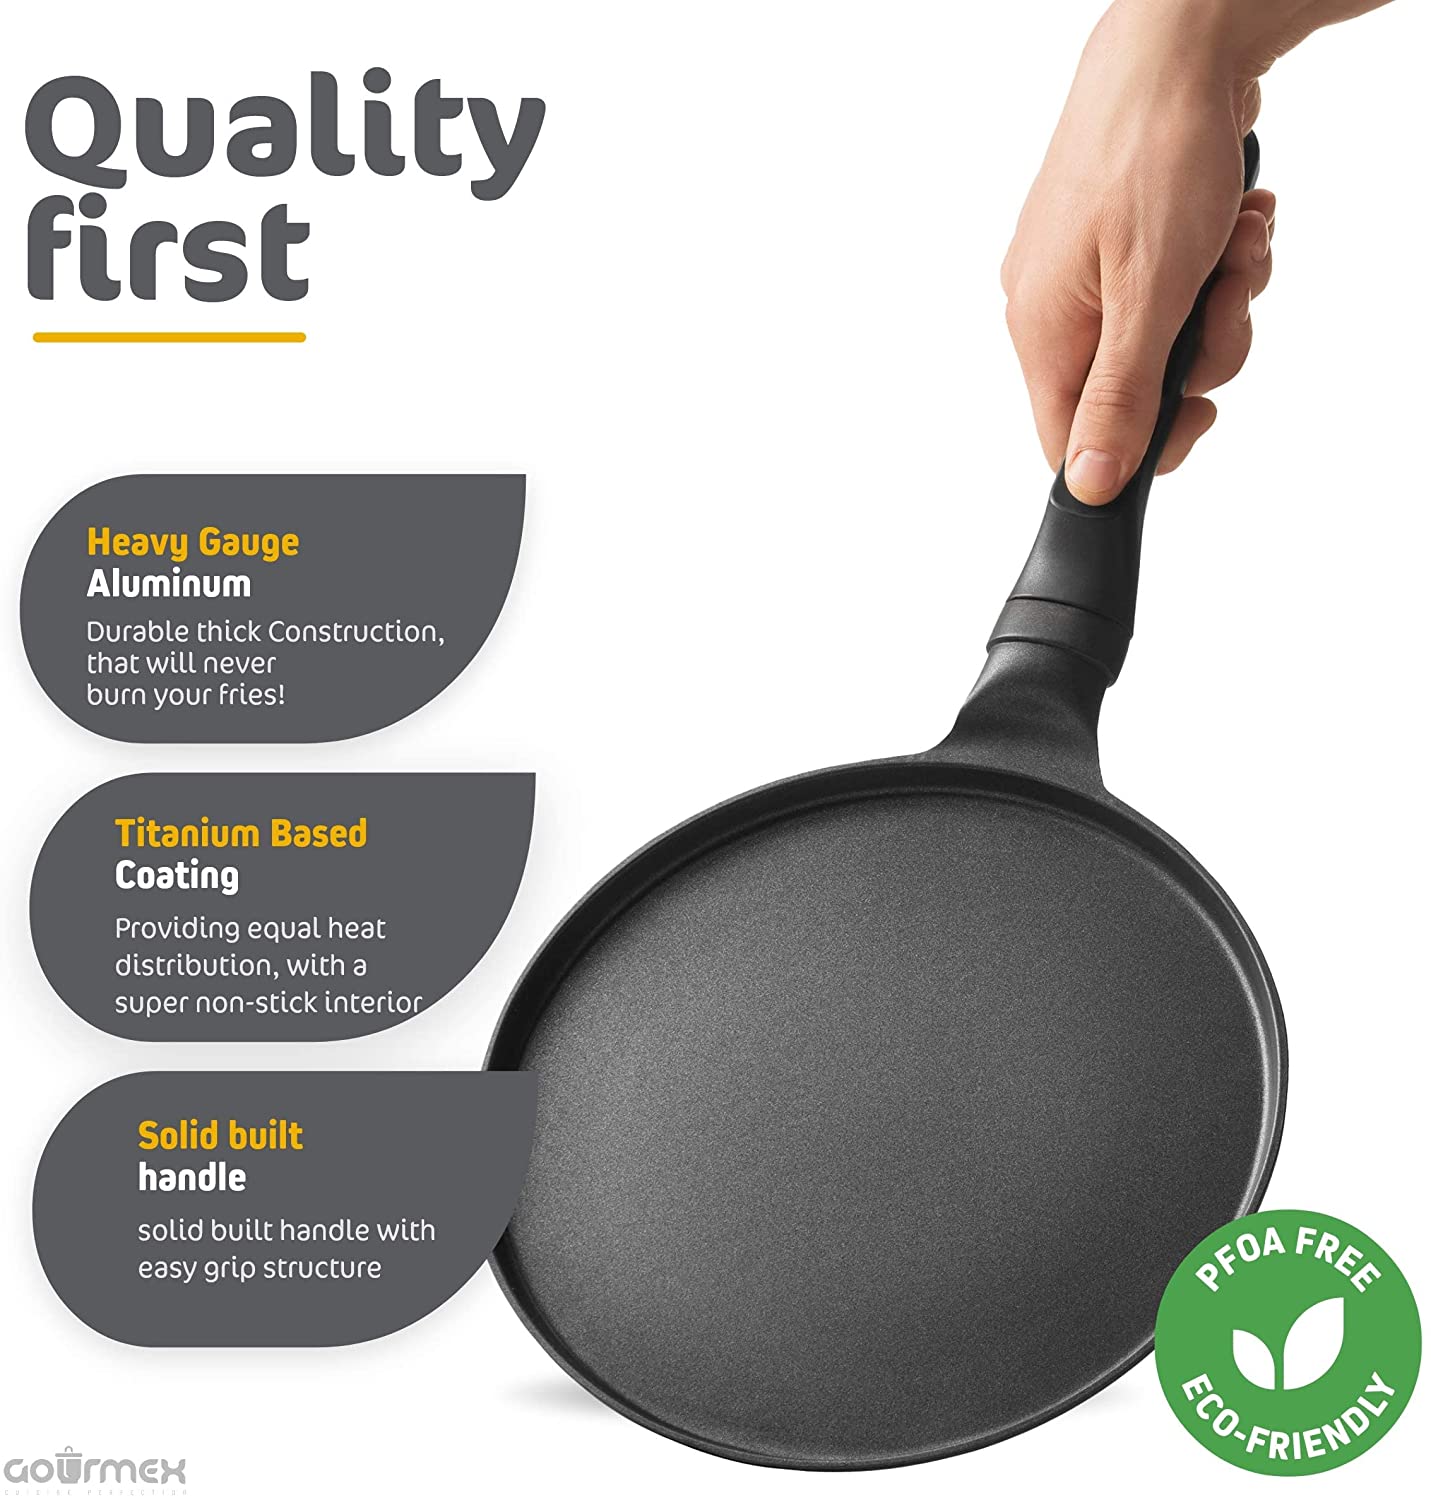 GOURMEX 22cm Black Induction Crepe Pan, with PFOA Free Nonstick Coating